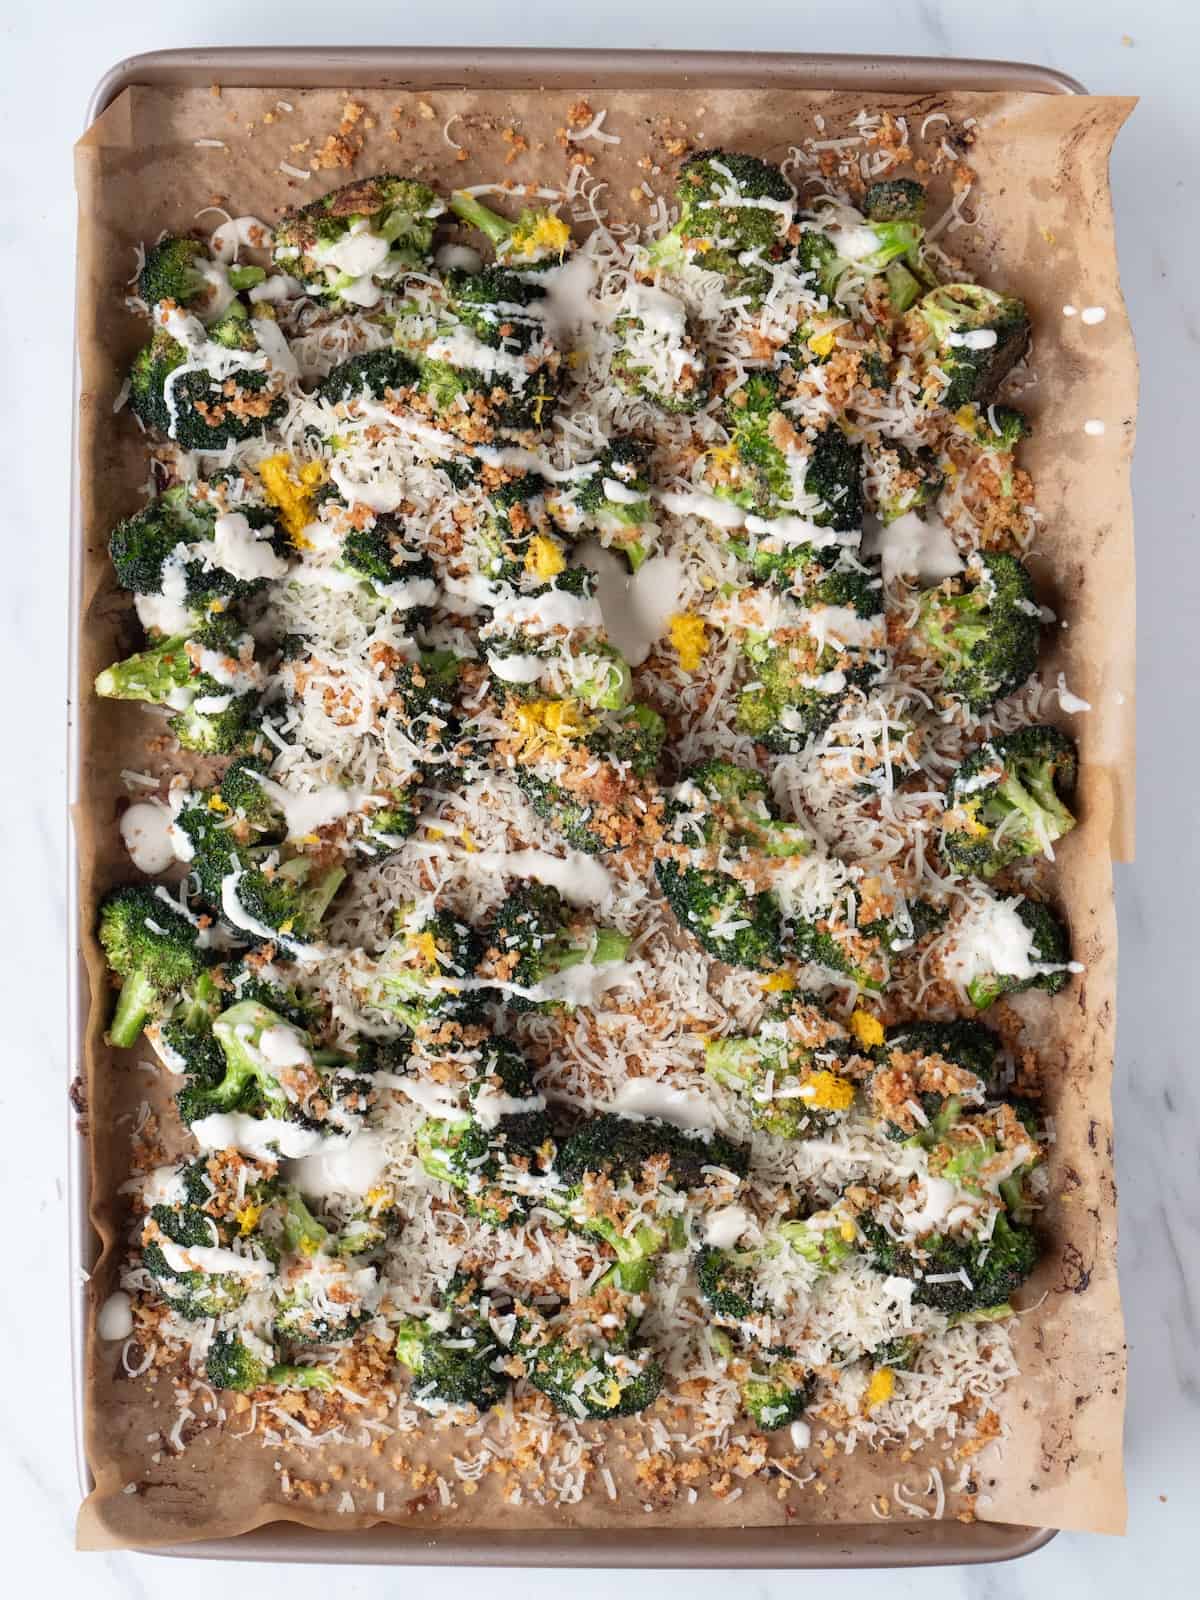 A parchment-lined baking sheet with broccoli florets baked, crispy and just out of the oven, topped with tahini sauce drizzle, toasted buttered breadcrumbs, lemon juice and zest and grated parmesan,.